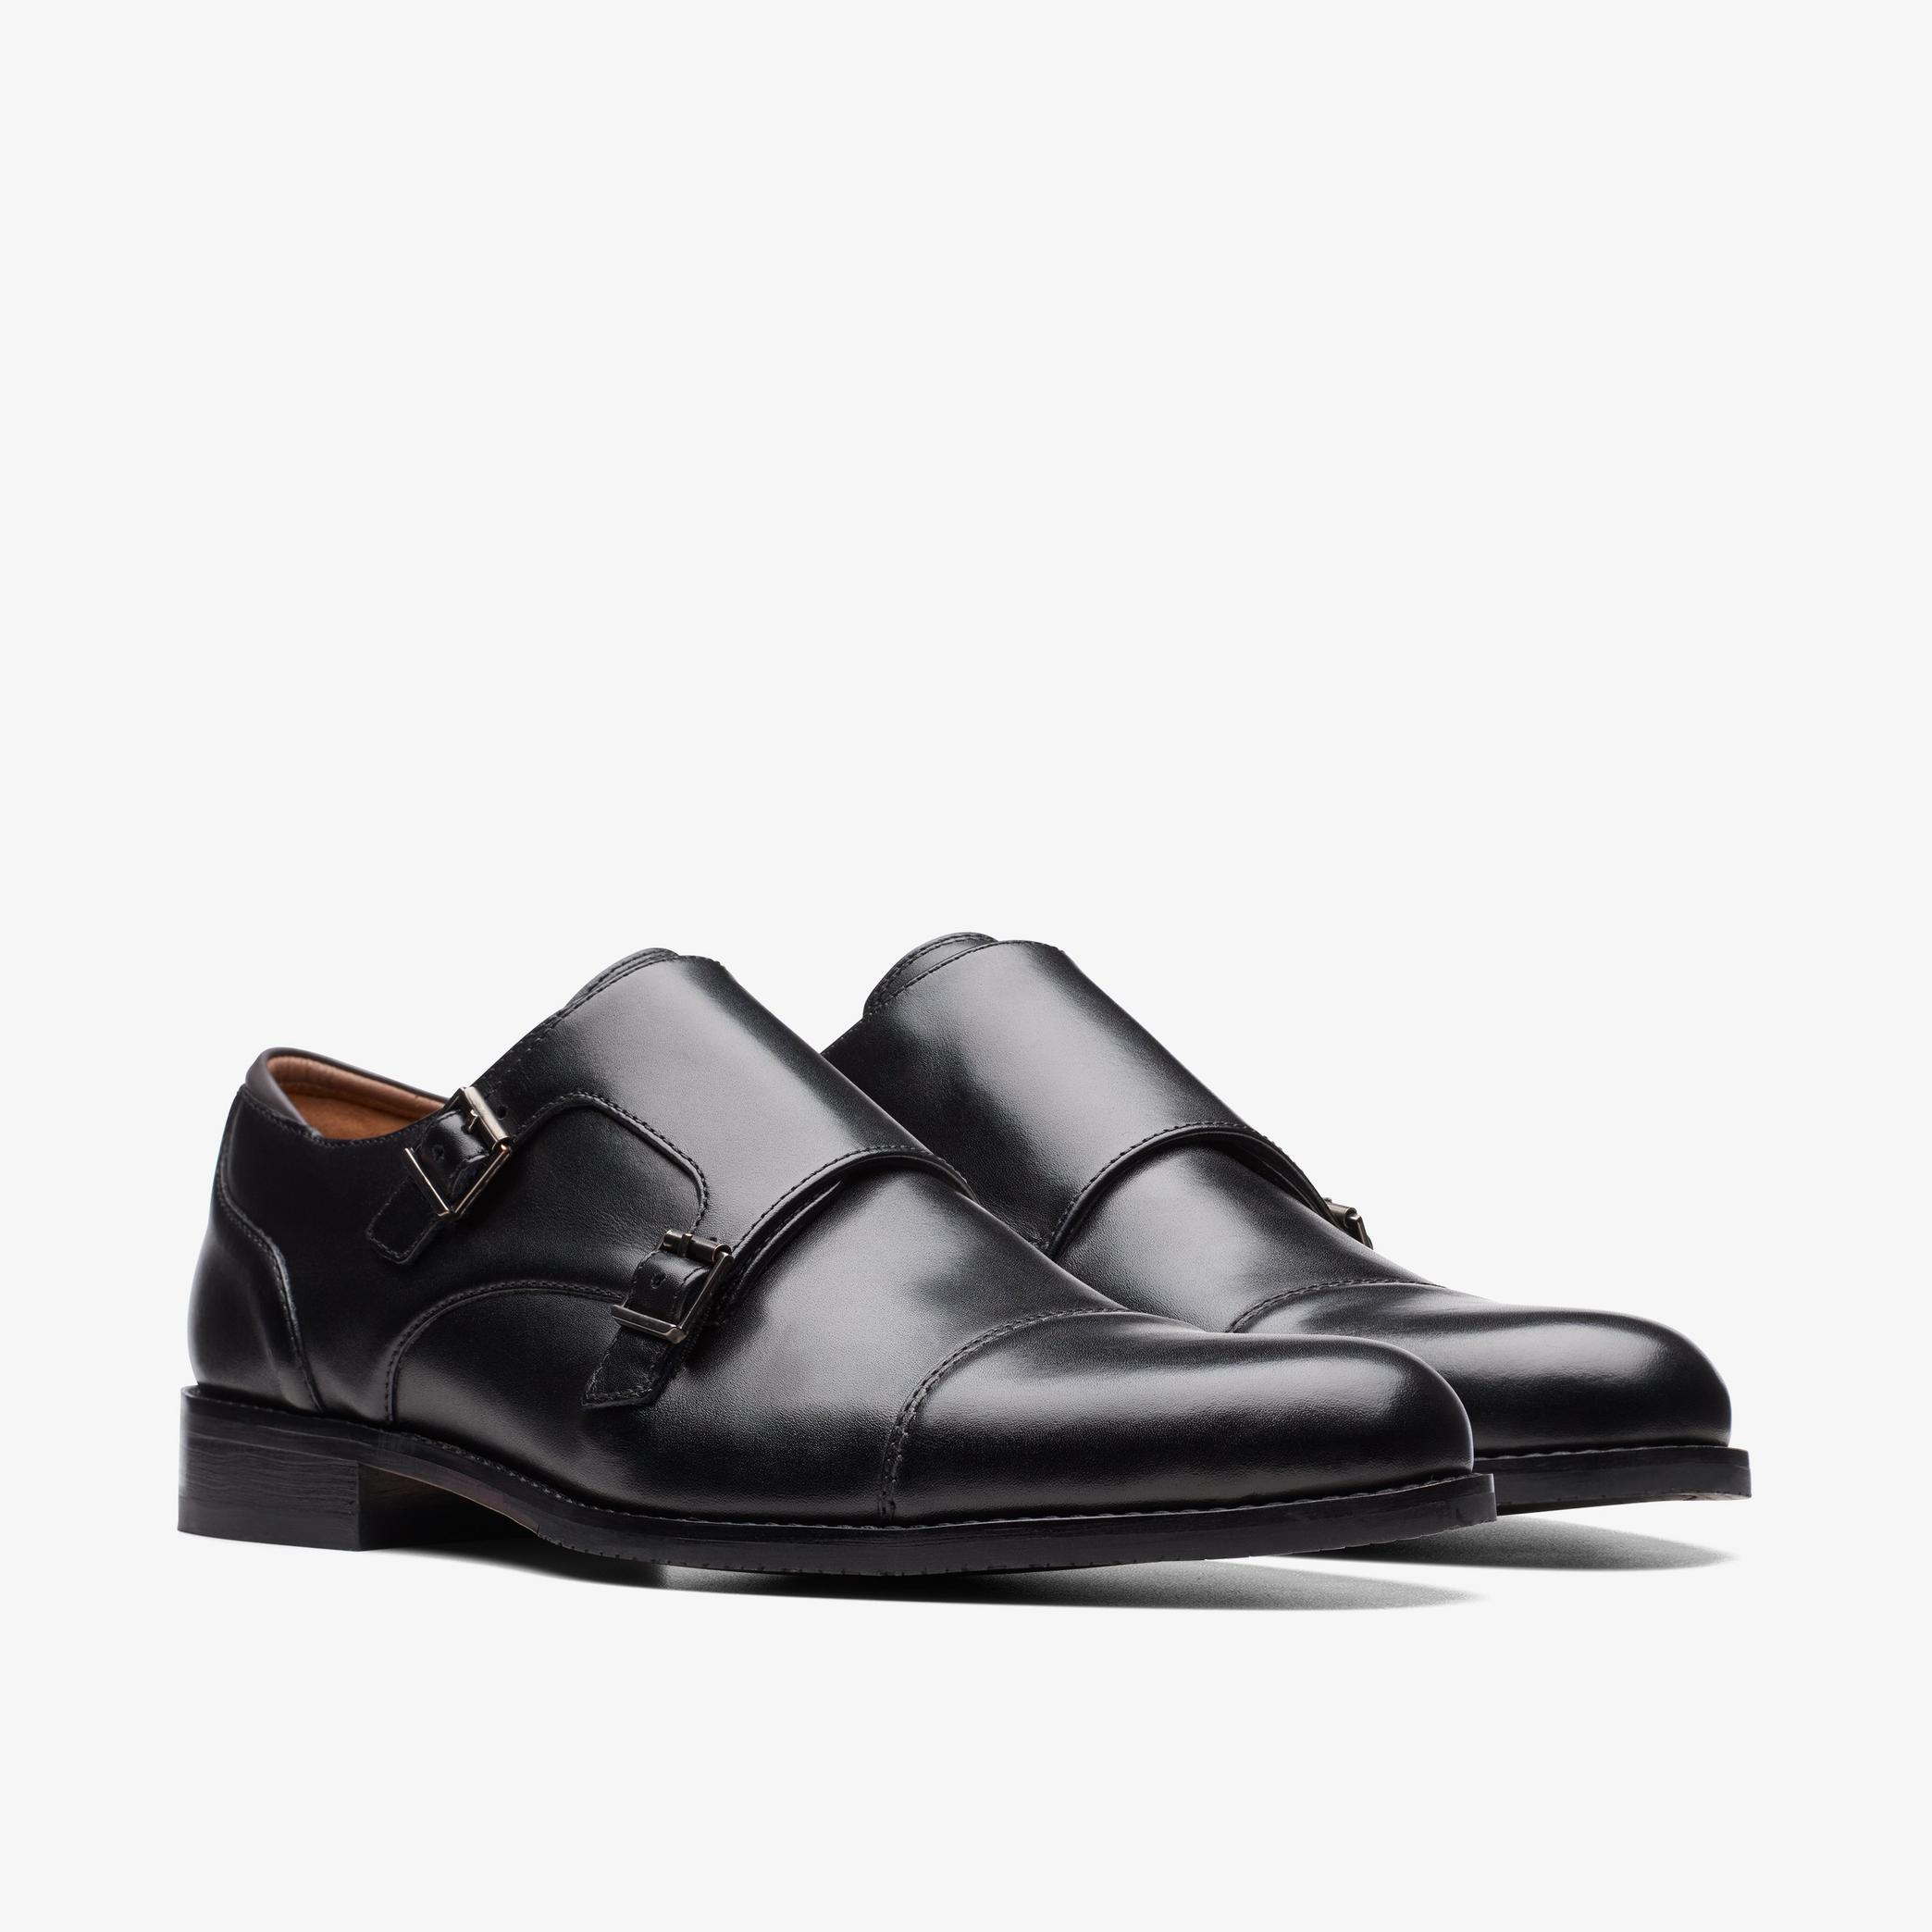 Craft Arlo Monk Black Leather Trouser Shoes, view 4 of 8